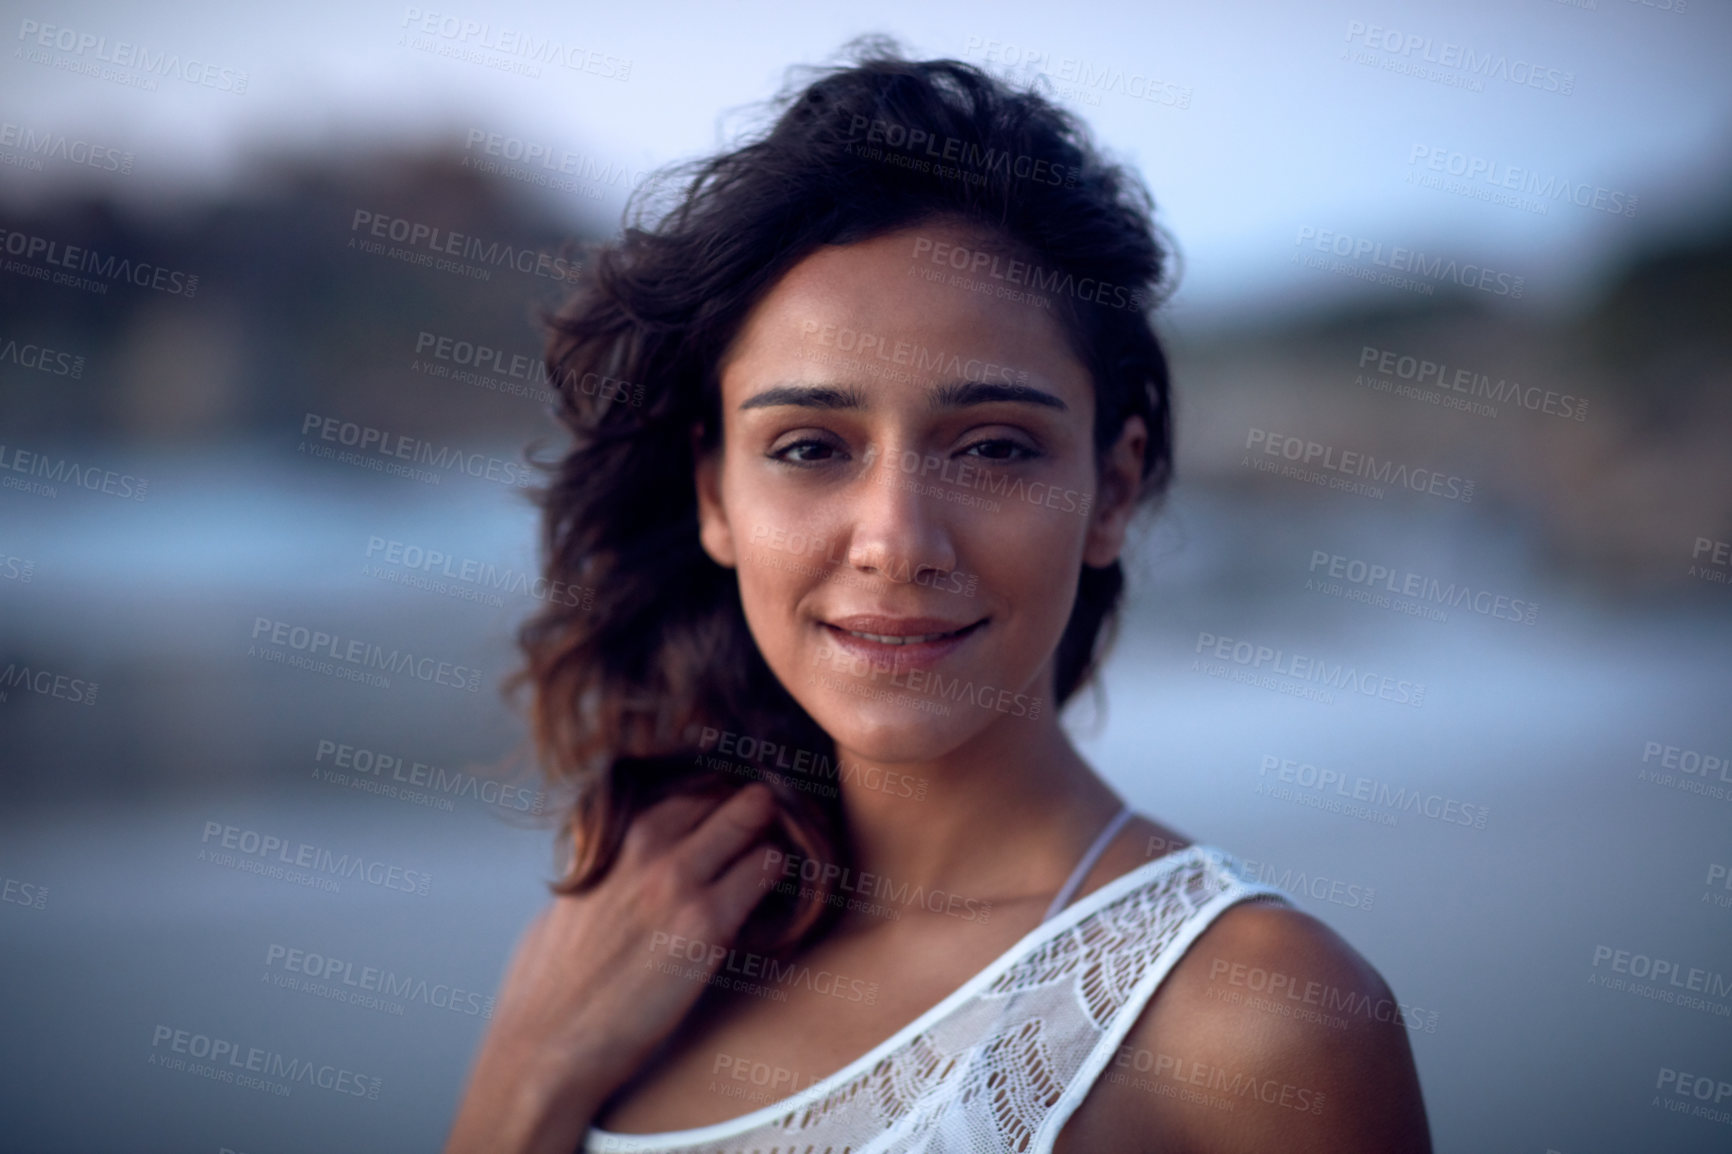 Buy stock photo Shot of a beautiful young woman spending the day at the beach